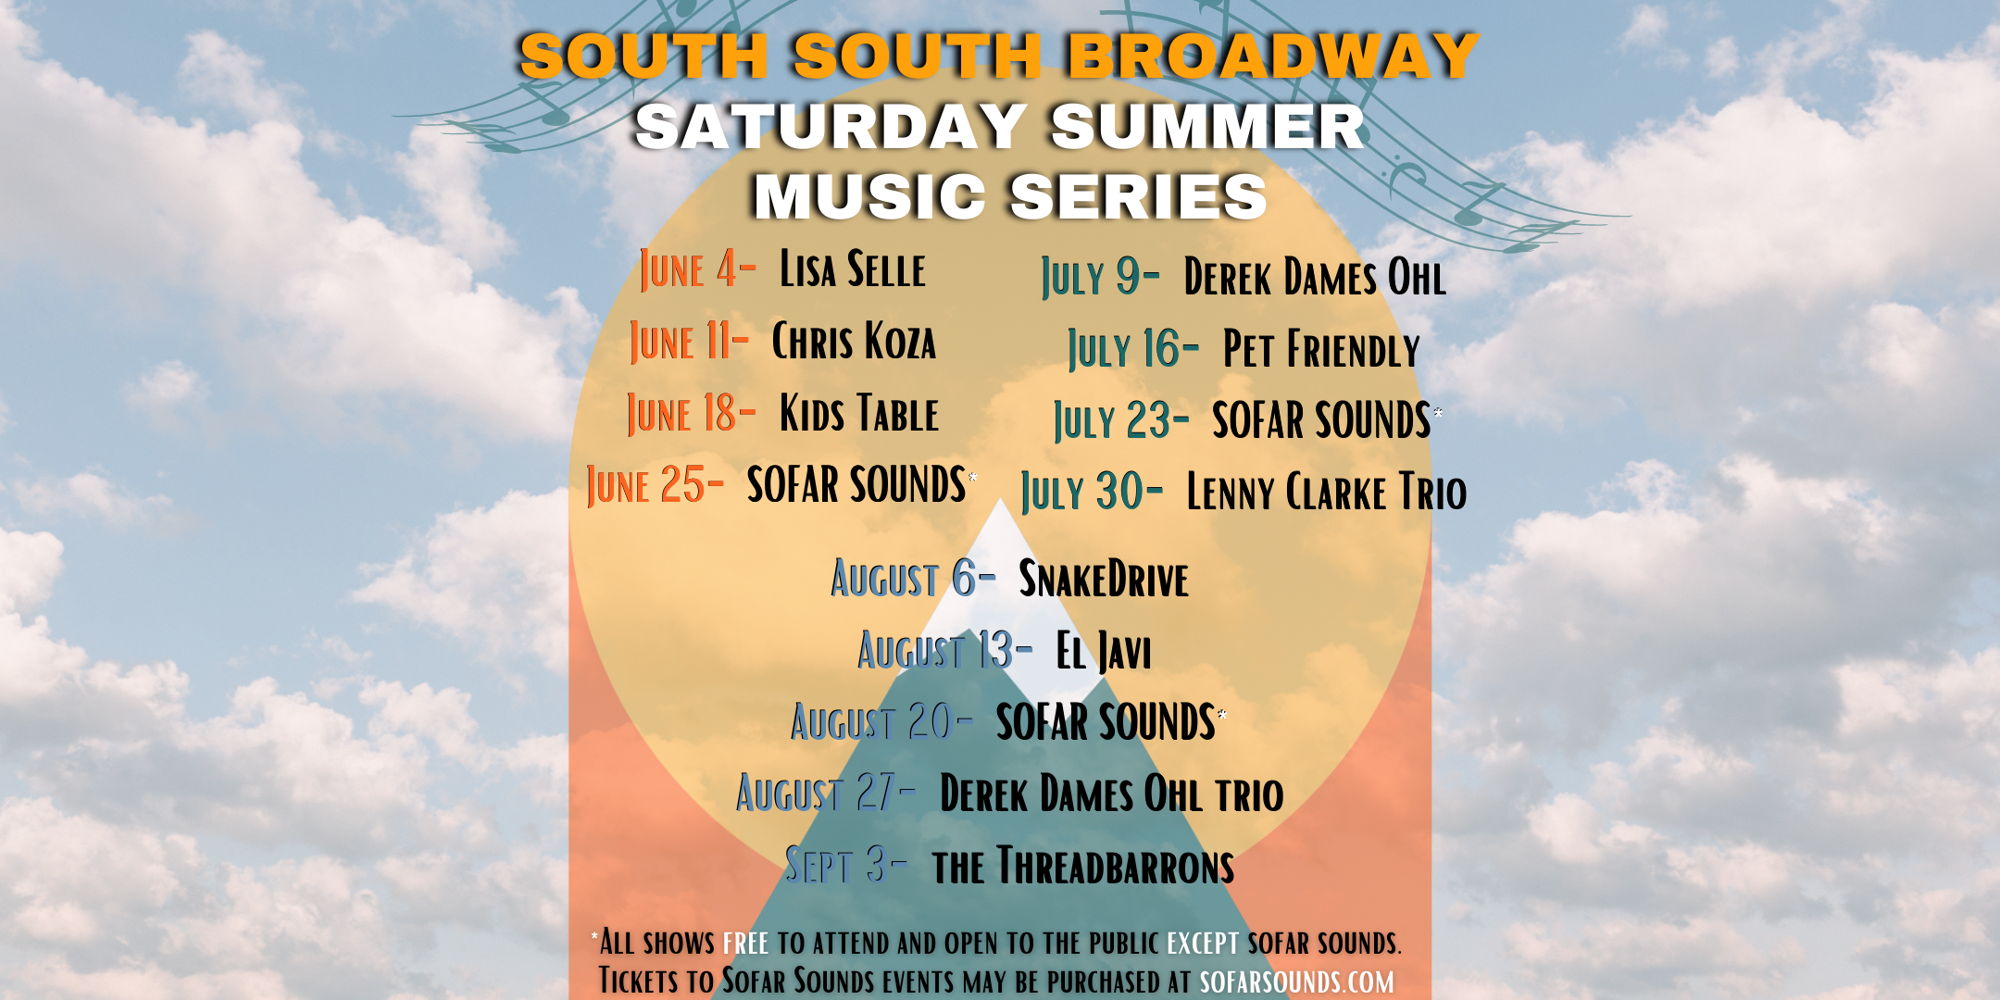 South South Broadway Saturday Summer Music Series Live at Western Sky promotional image